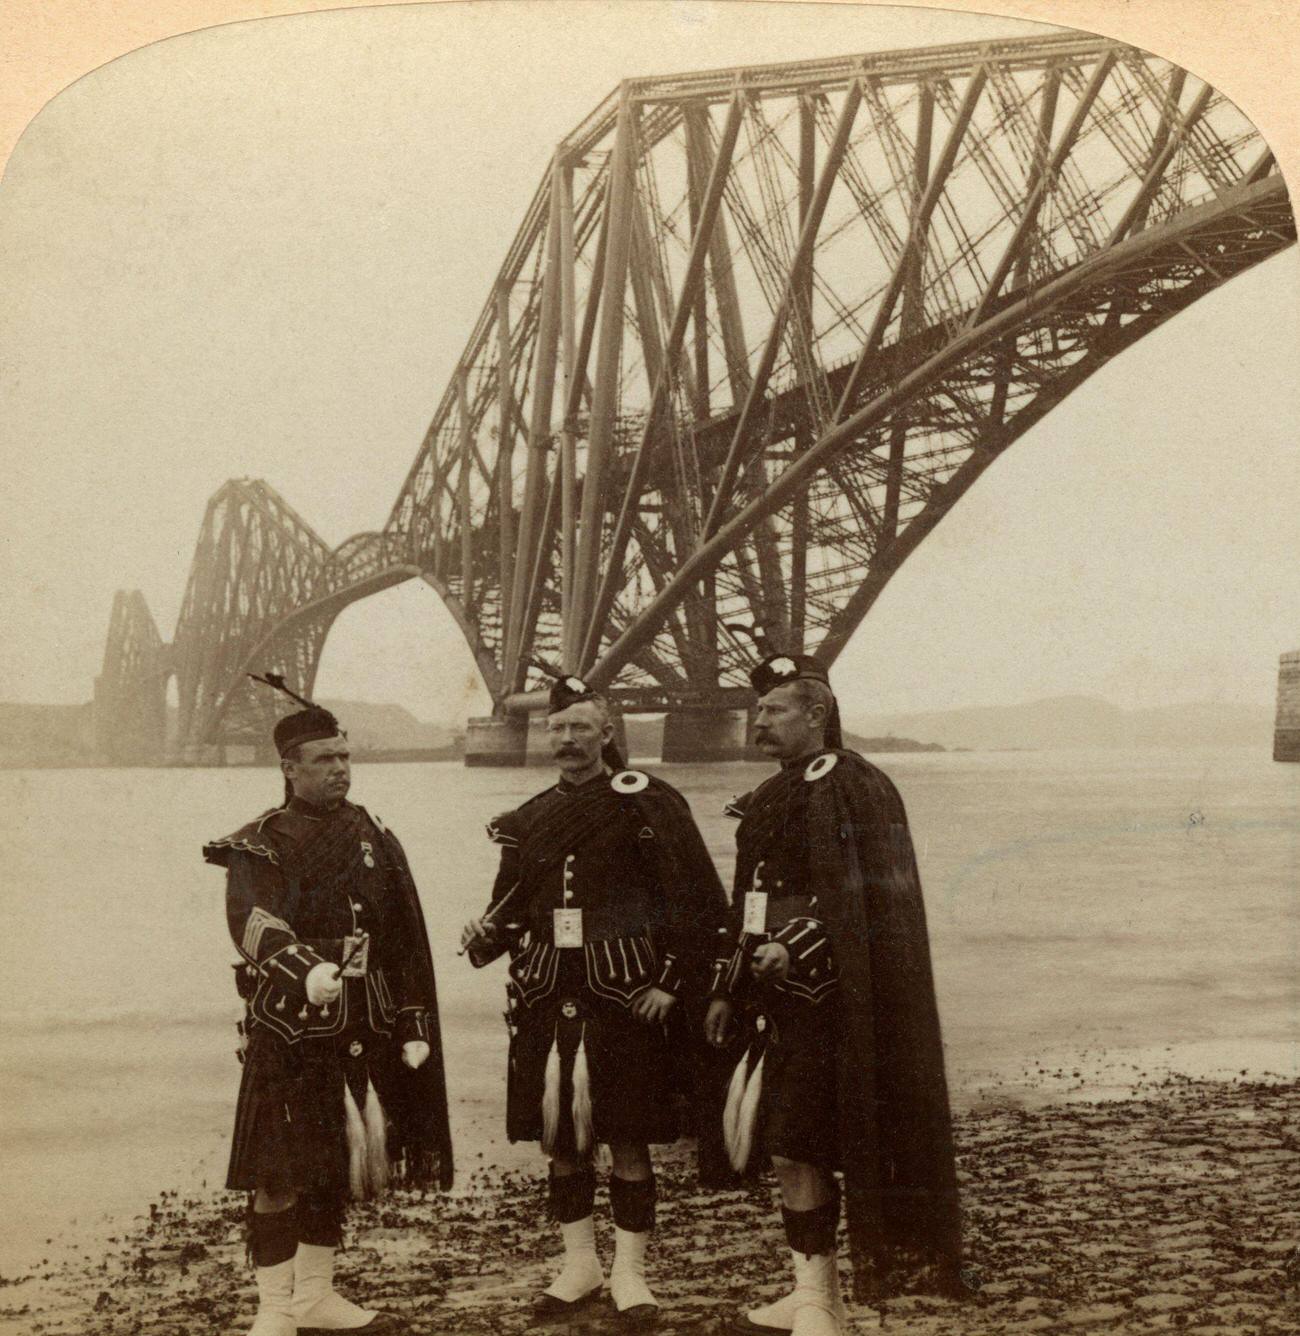 Men in Highland dress in front of the Forth Bridge, Scotland.